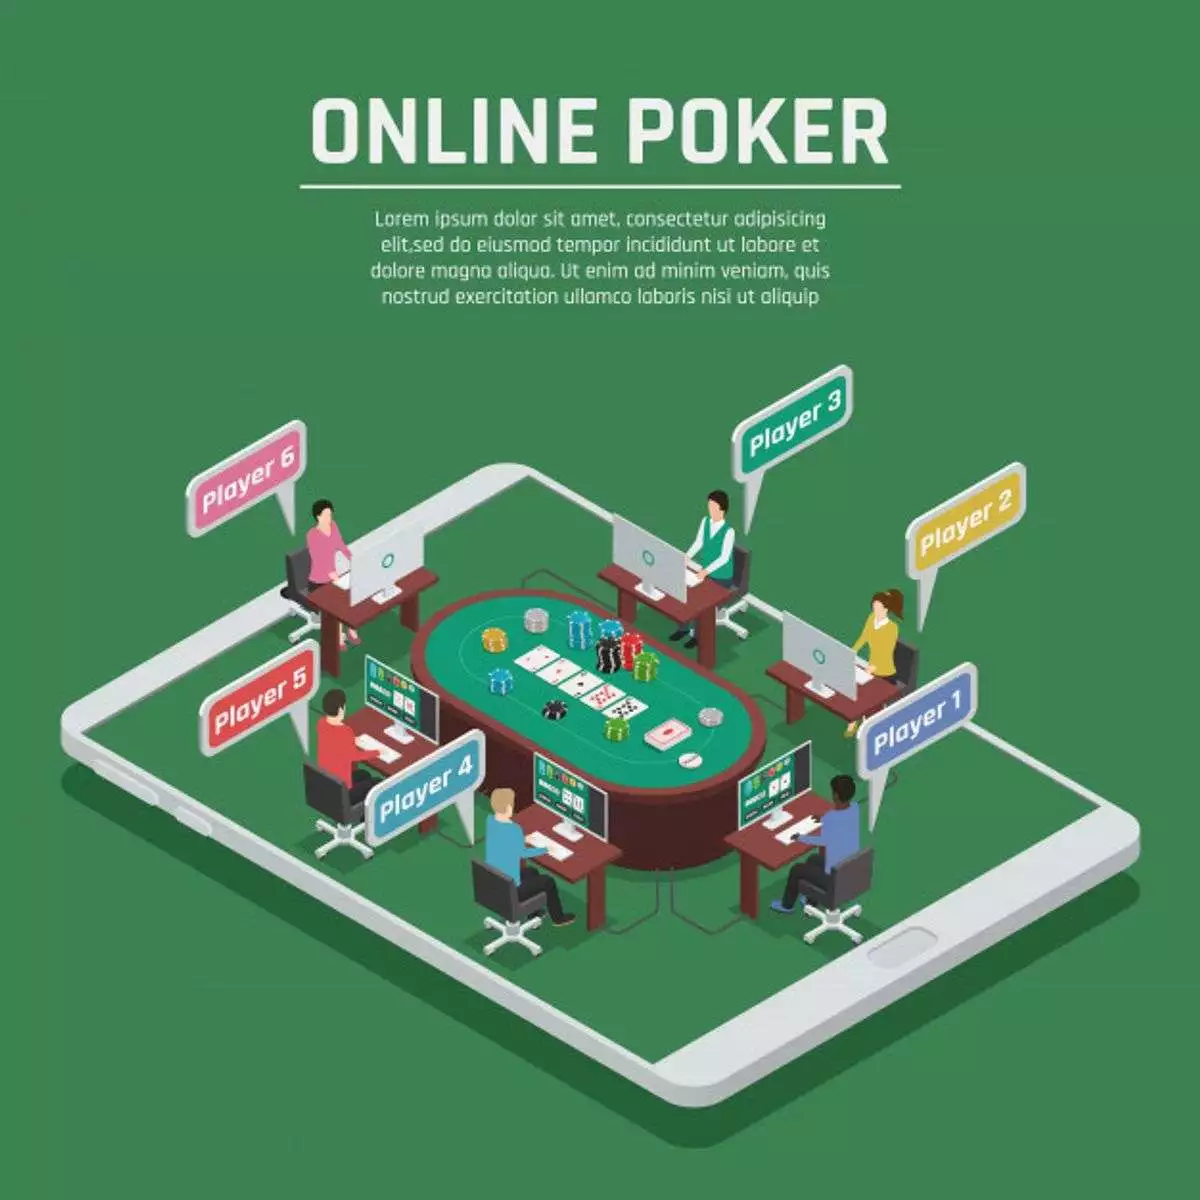 Online Poker Reviews – How to Find the Best Deals